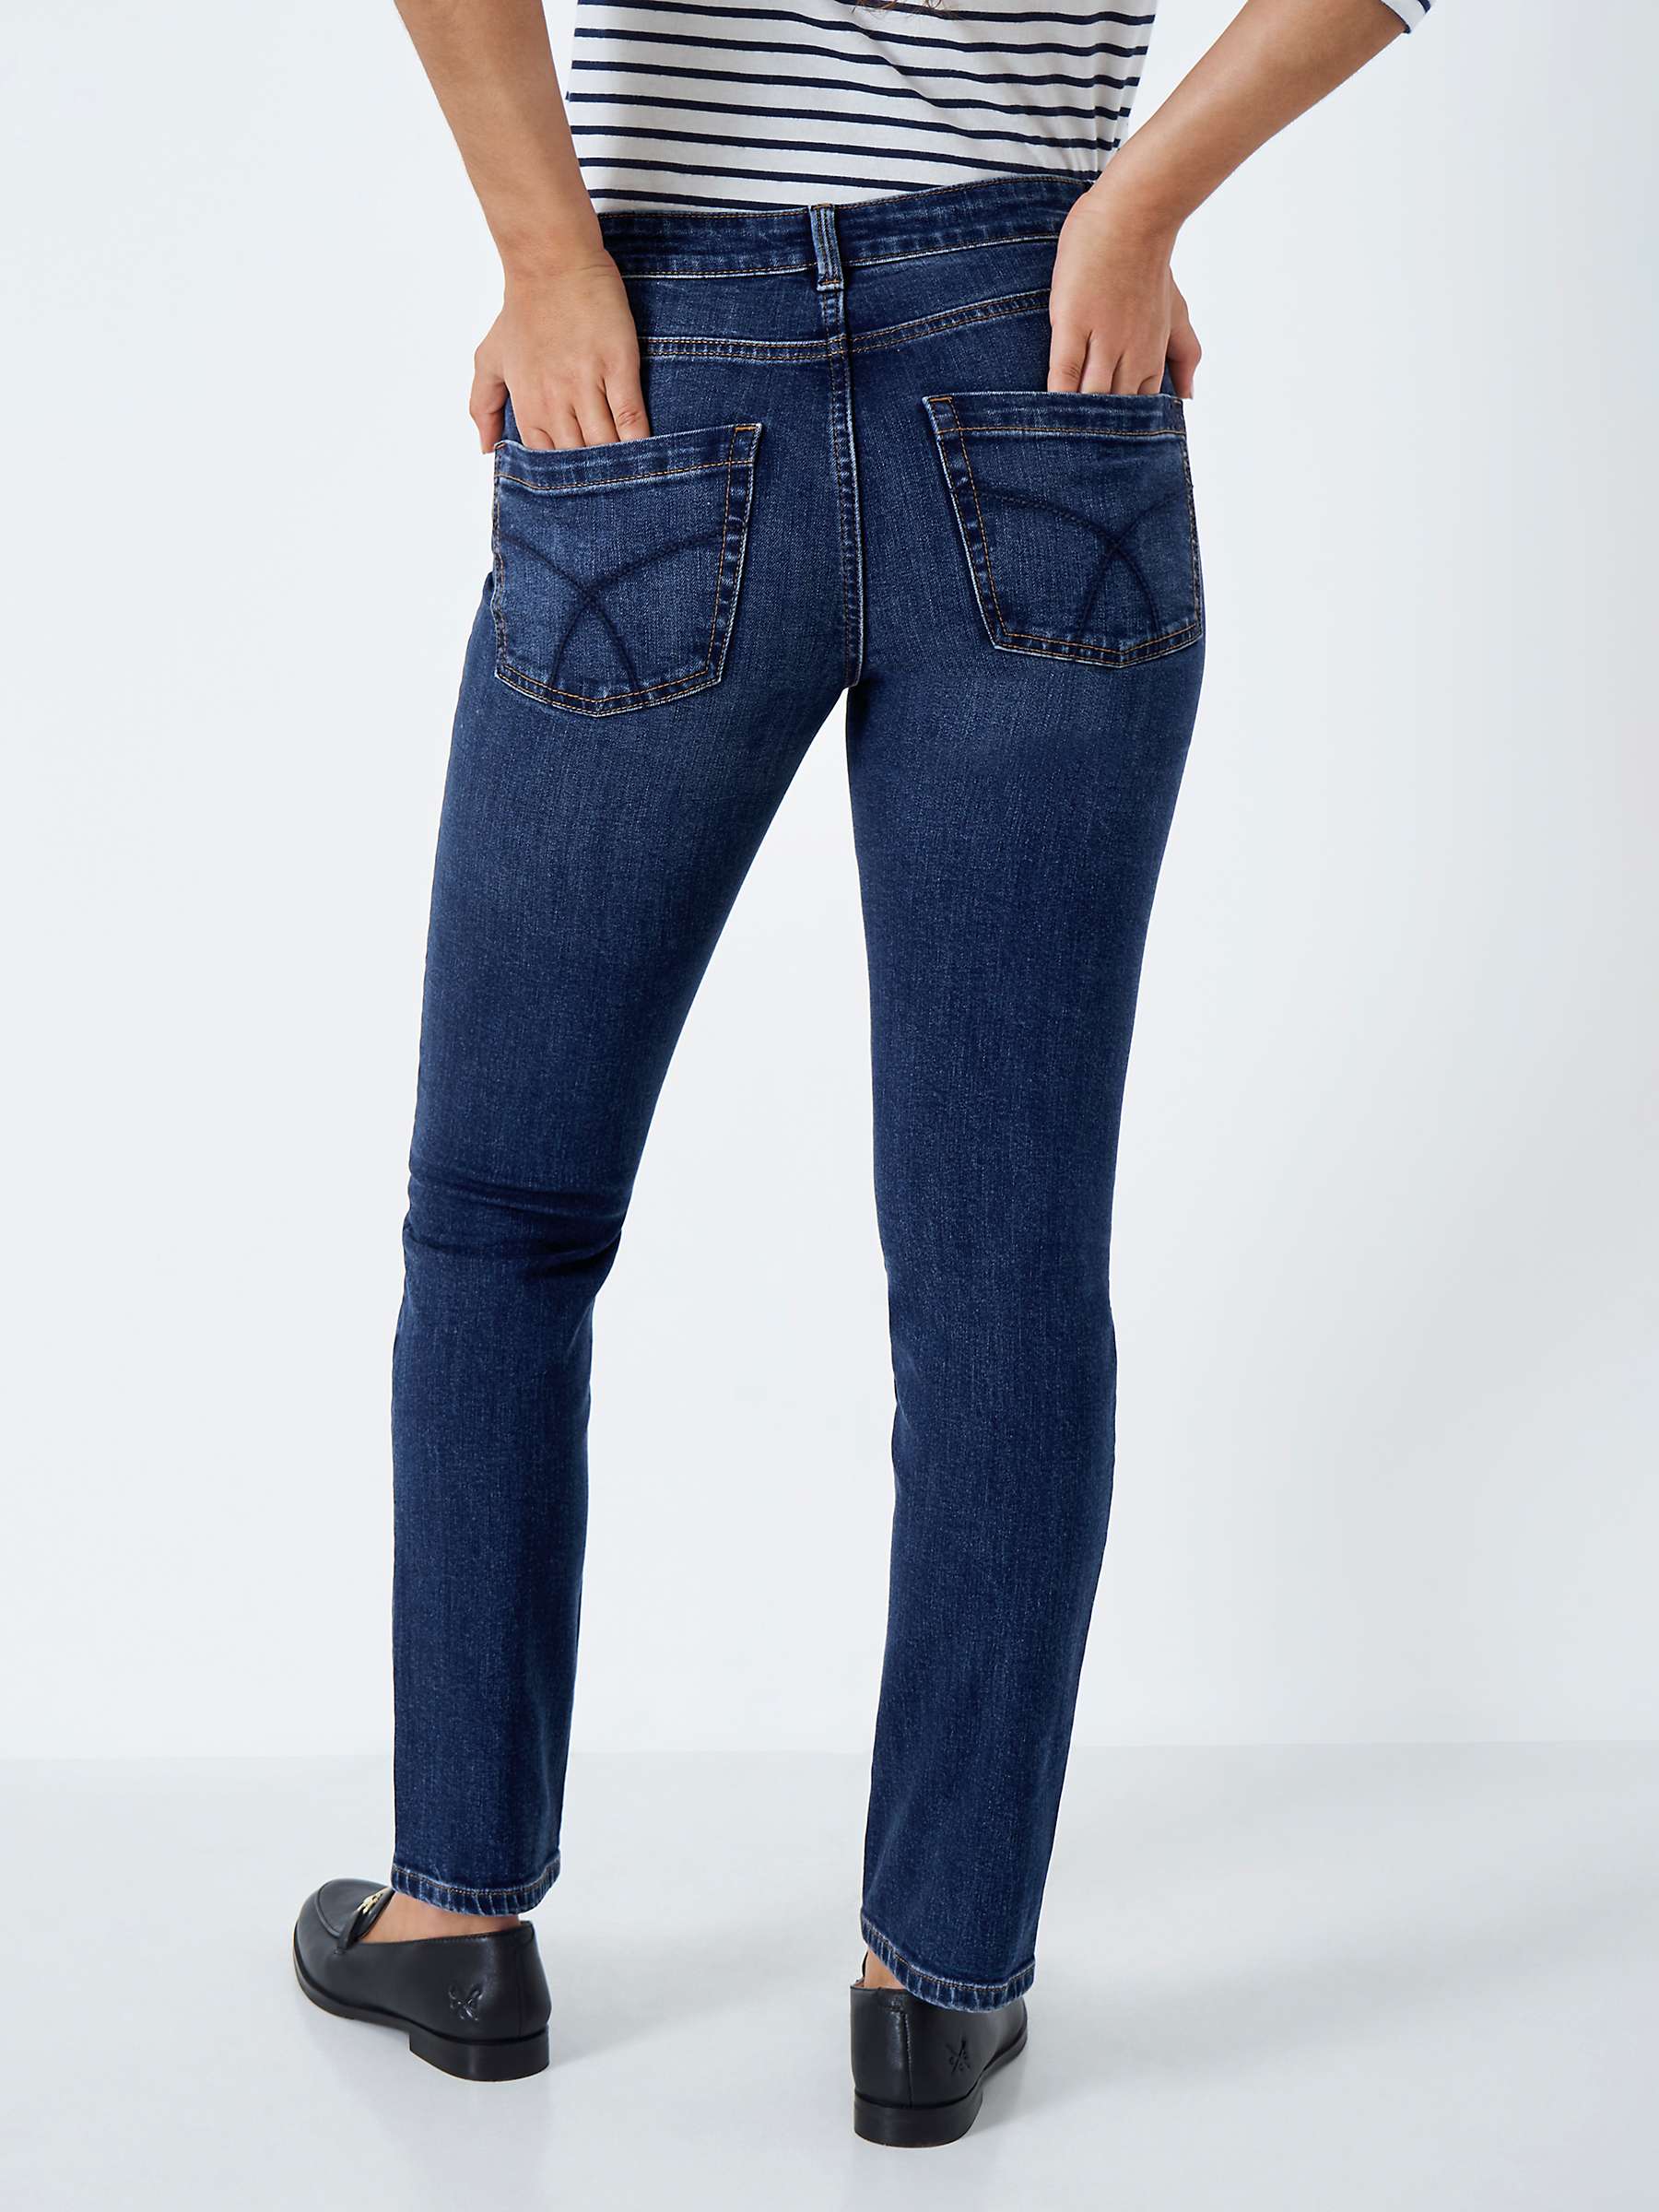 Buy Crew Clothing Straight Leg Jeans Online at johnlewis.com